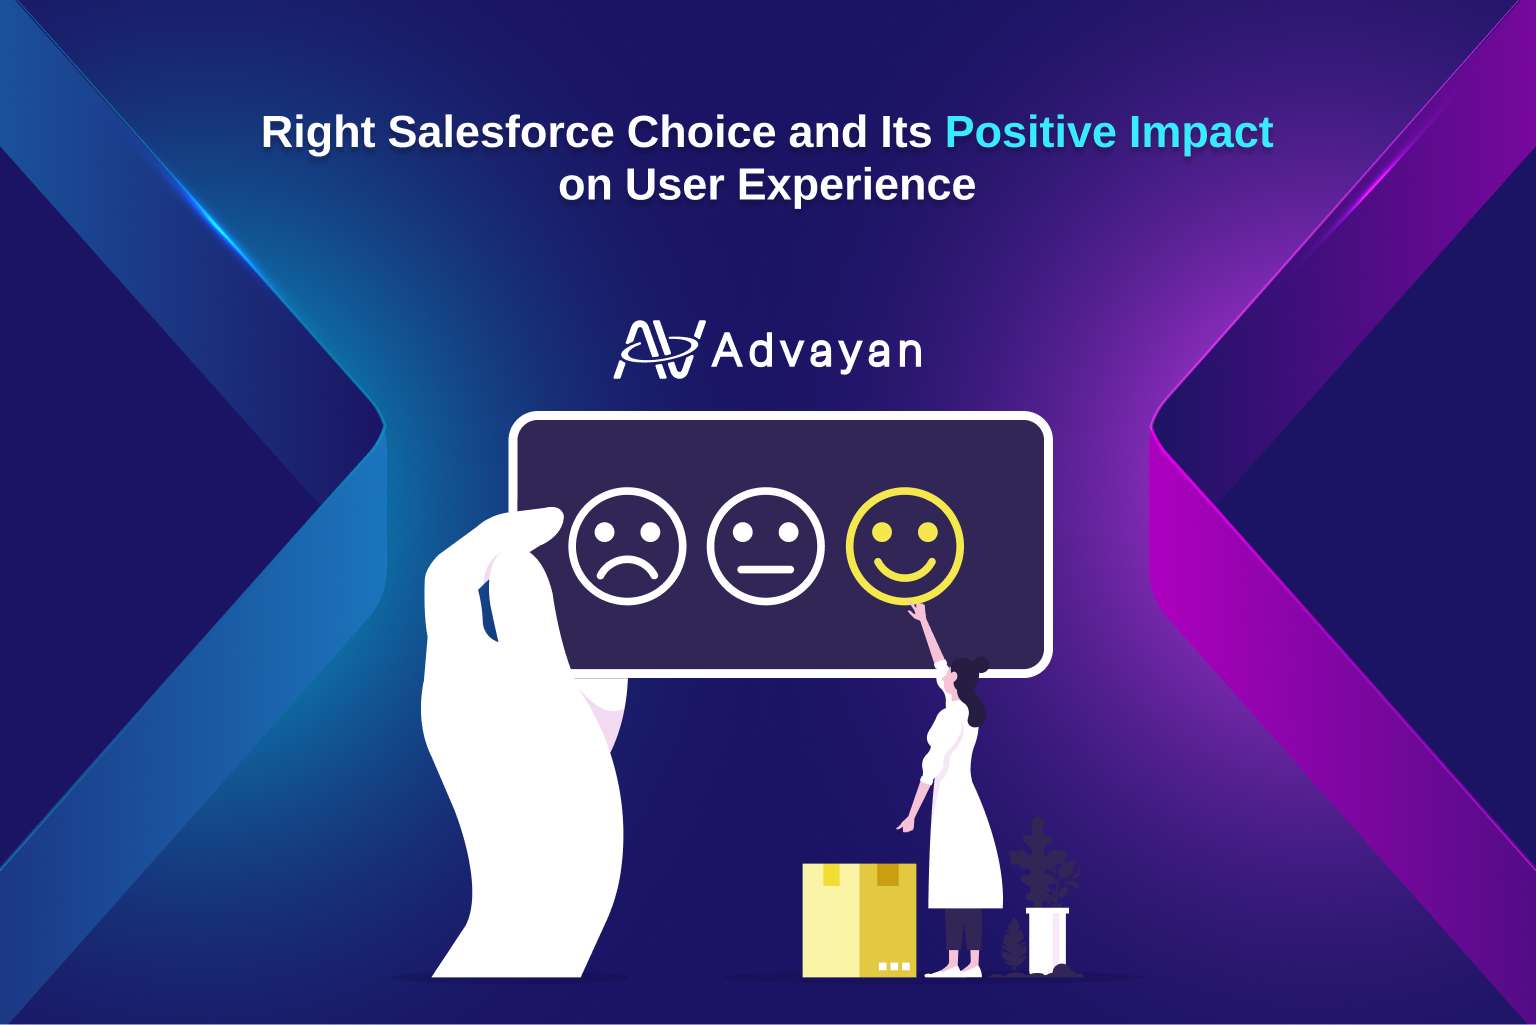 The Right Salesforce Choice and Its Positive Impact on User Experience